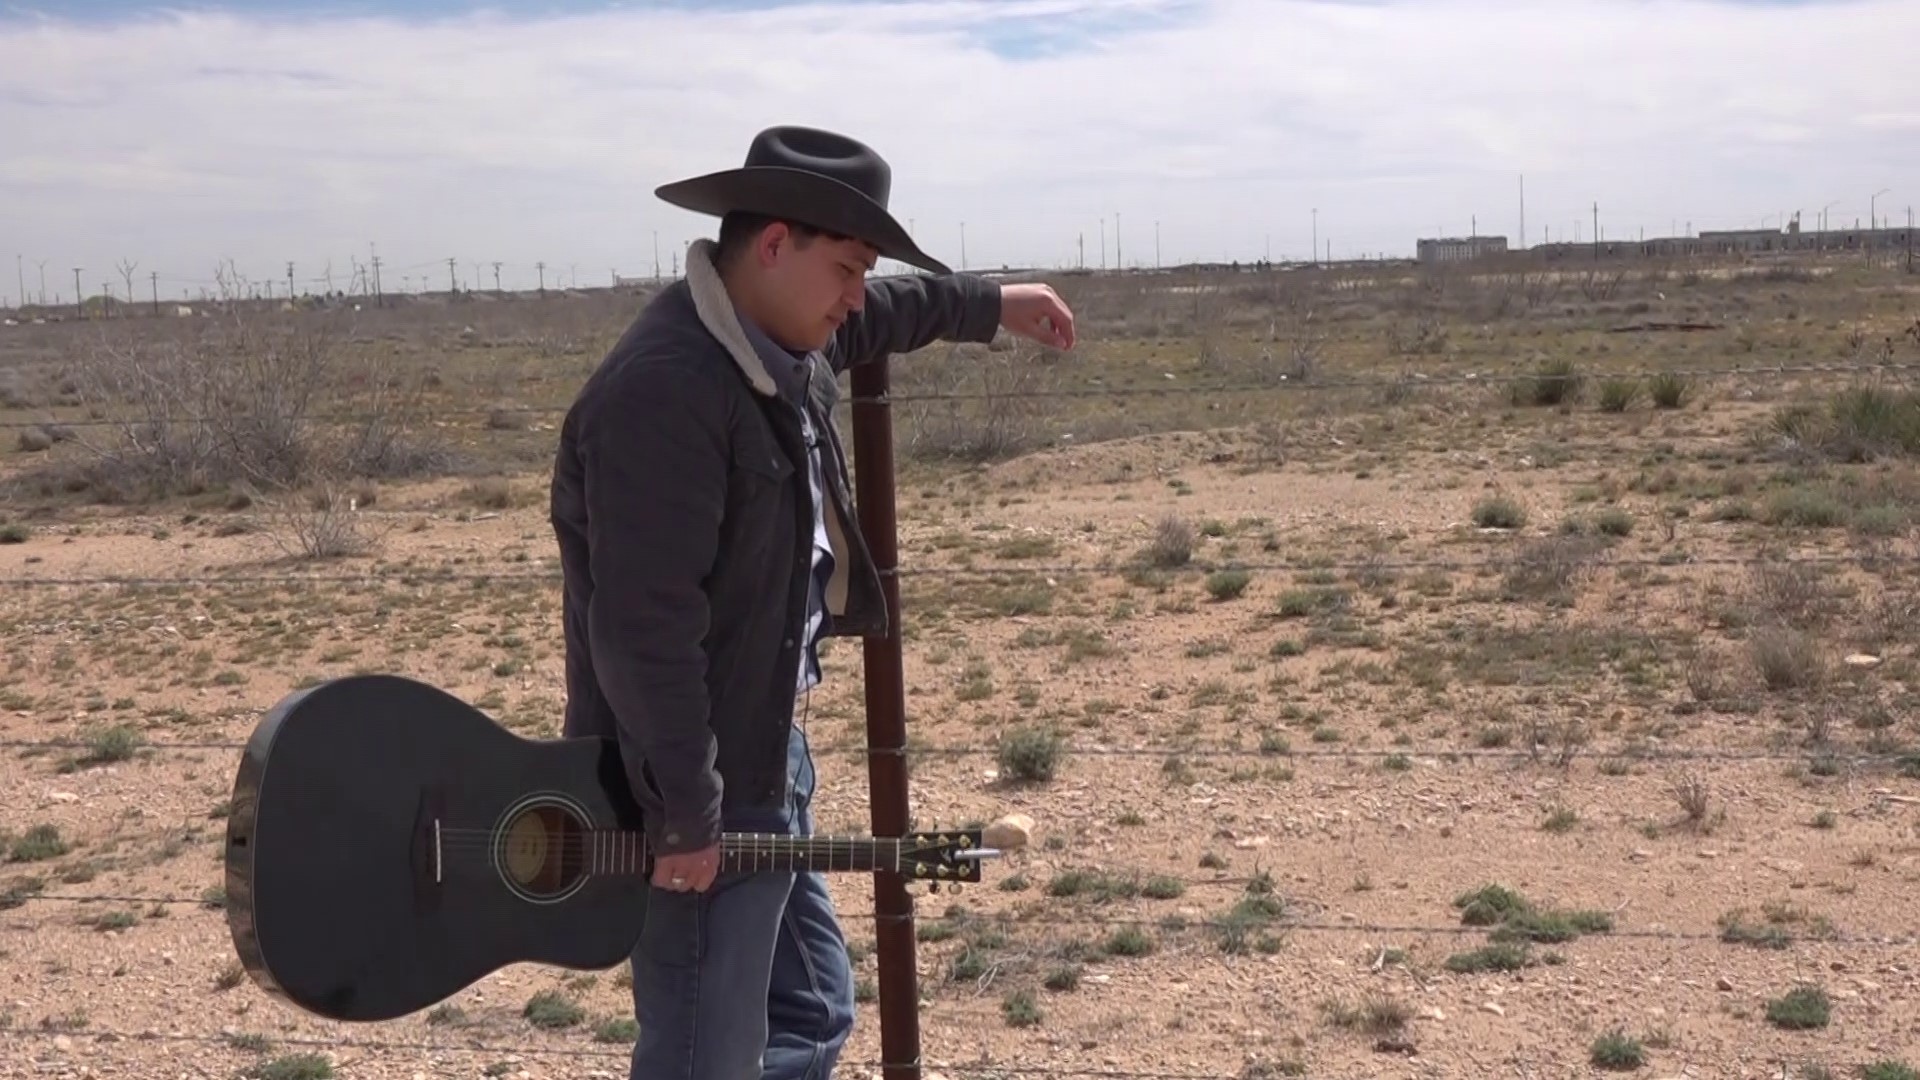 Pecos native and musician Ashten Aguilar is set to play a roughneck on a show currently in production called "Landman".